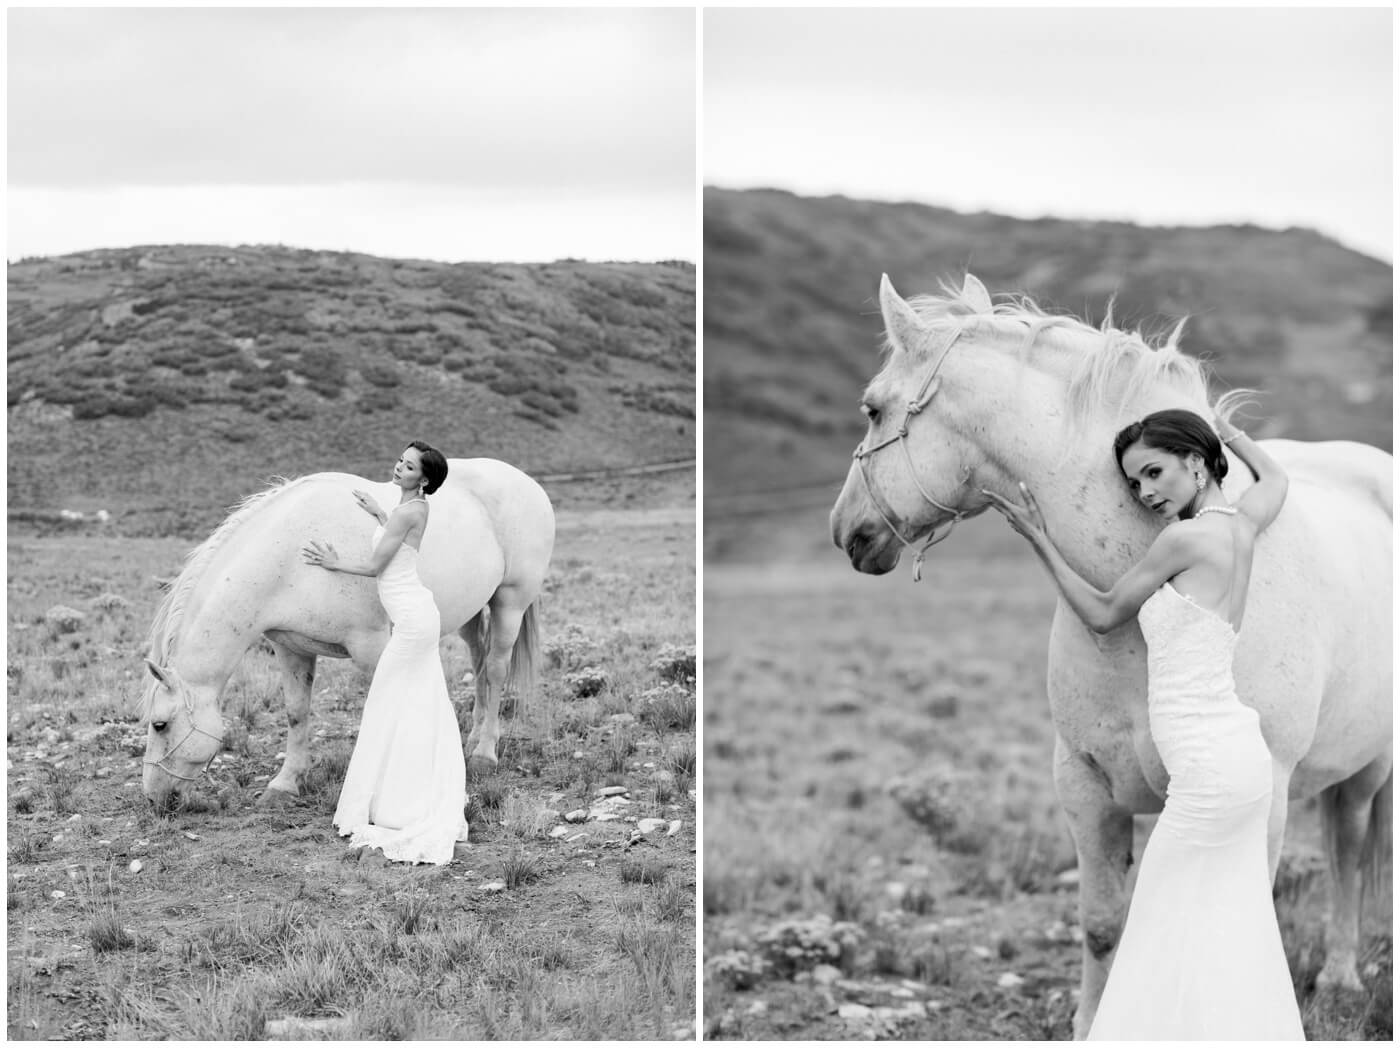 Wedding in the mountains | A bride stands elegantly next to a horse